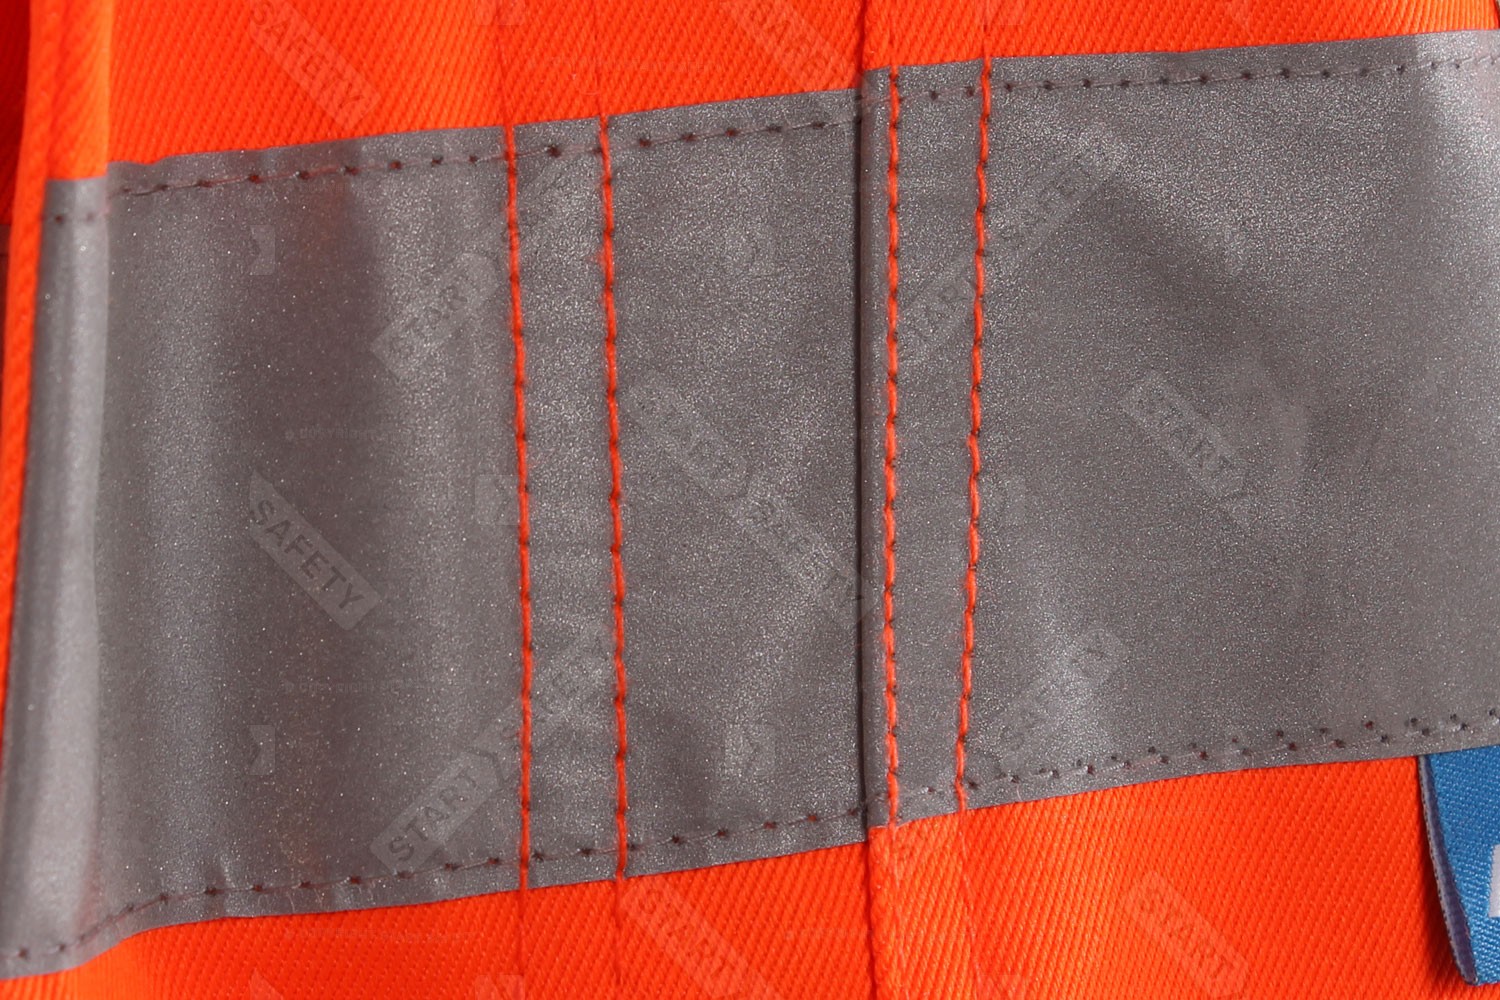 Double Stiched Seam On Pulsar Overalls